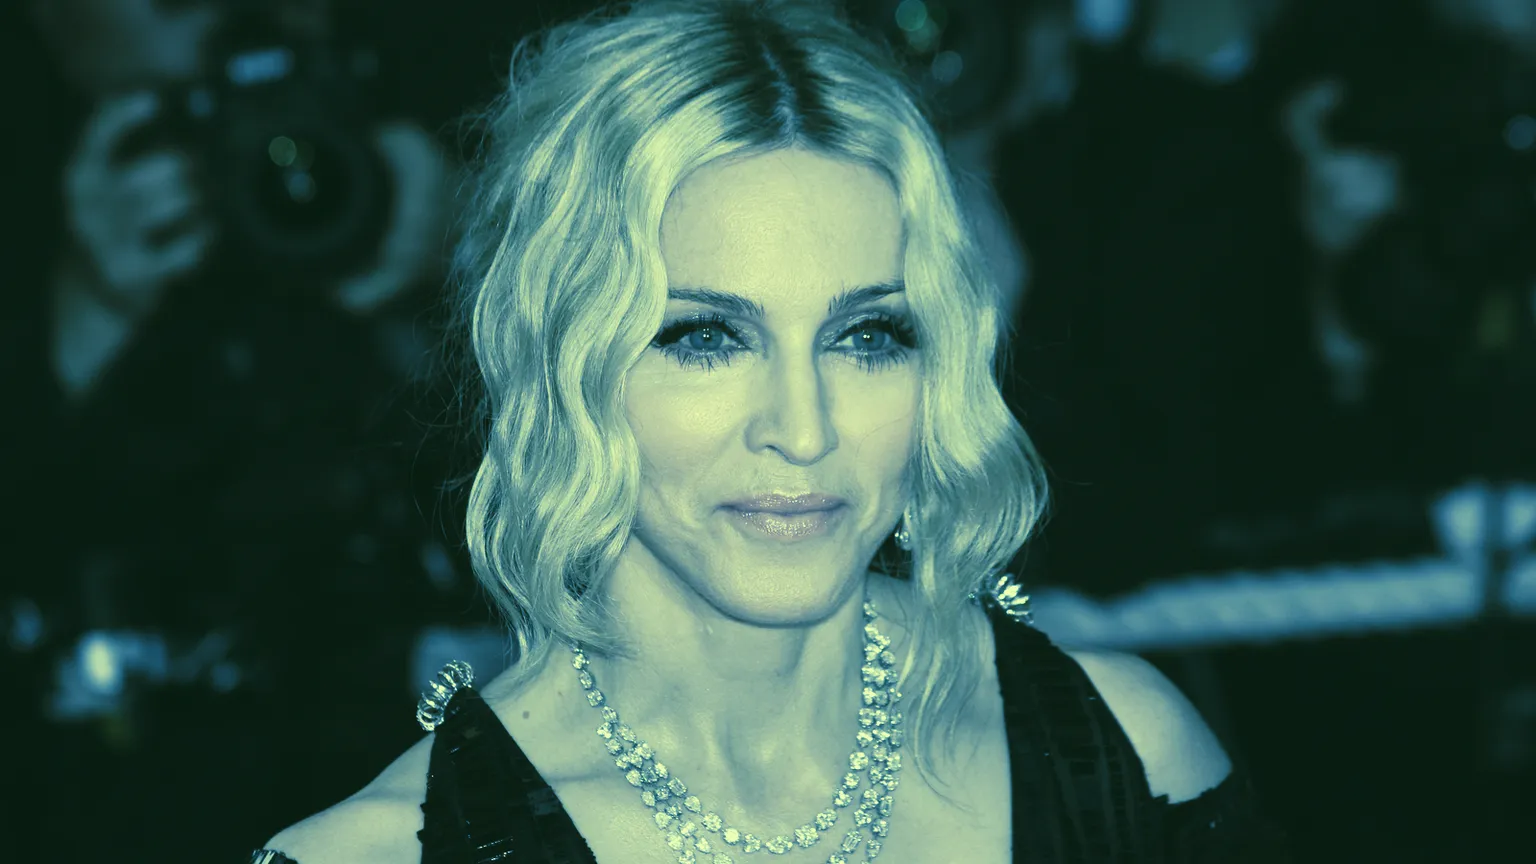 Hackers to auction off sensitive data on Madonna. Image: Shutterstock